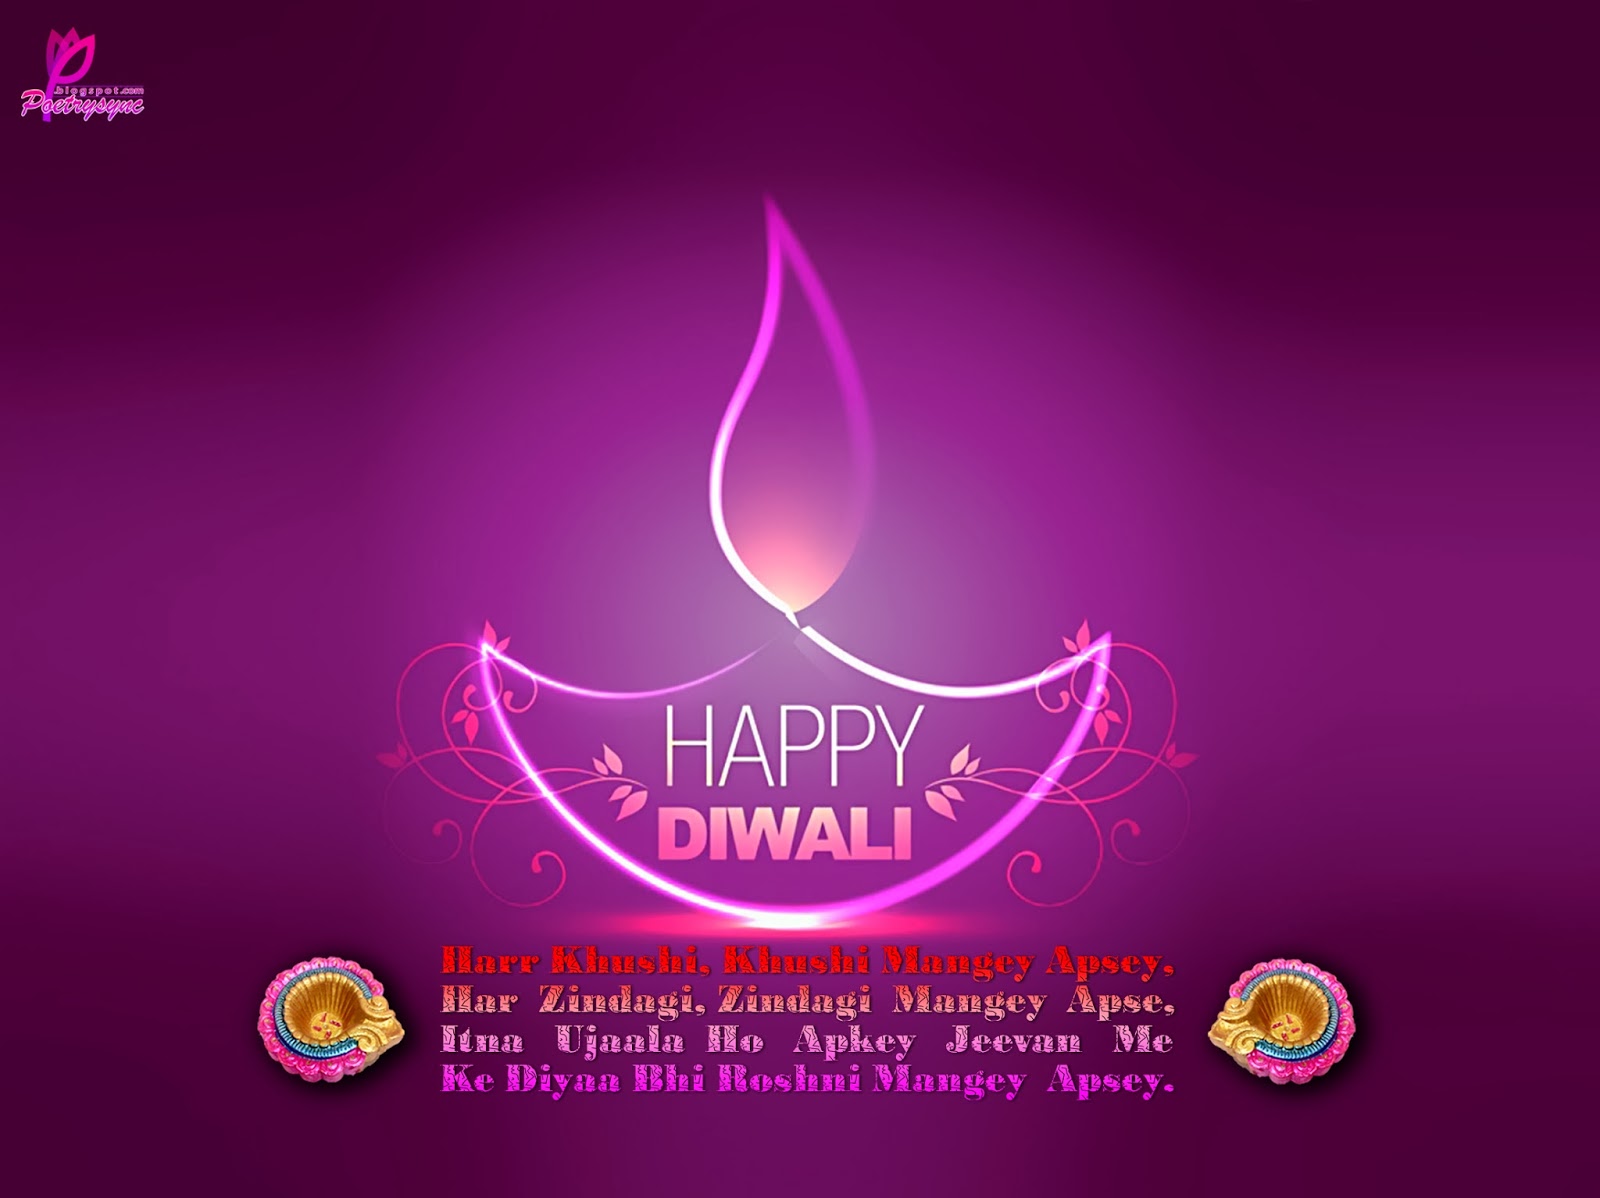 Diwali Greetings Quotes Hd Wallpapers - Graphic Design - 1600x1198 Wallpaper  